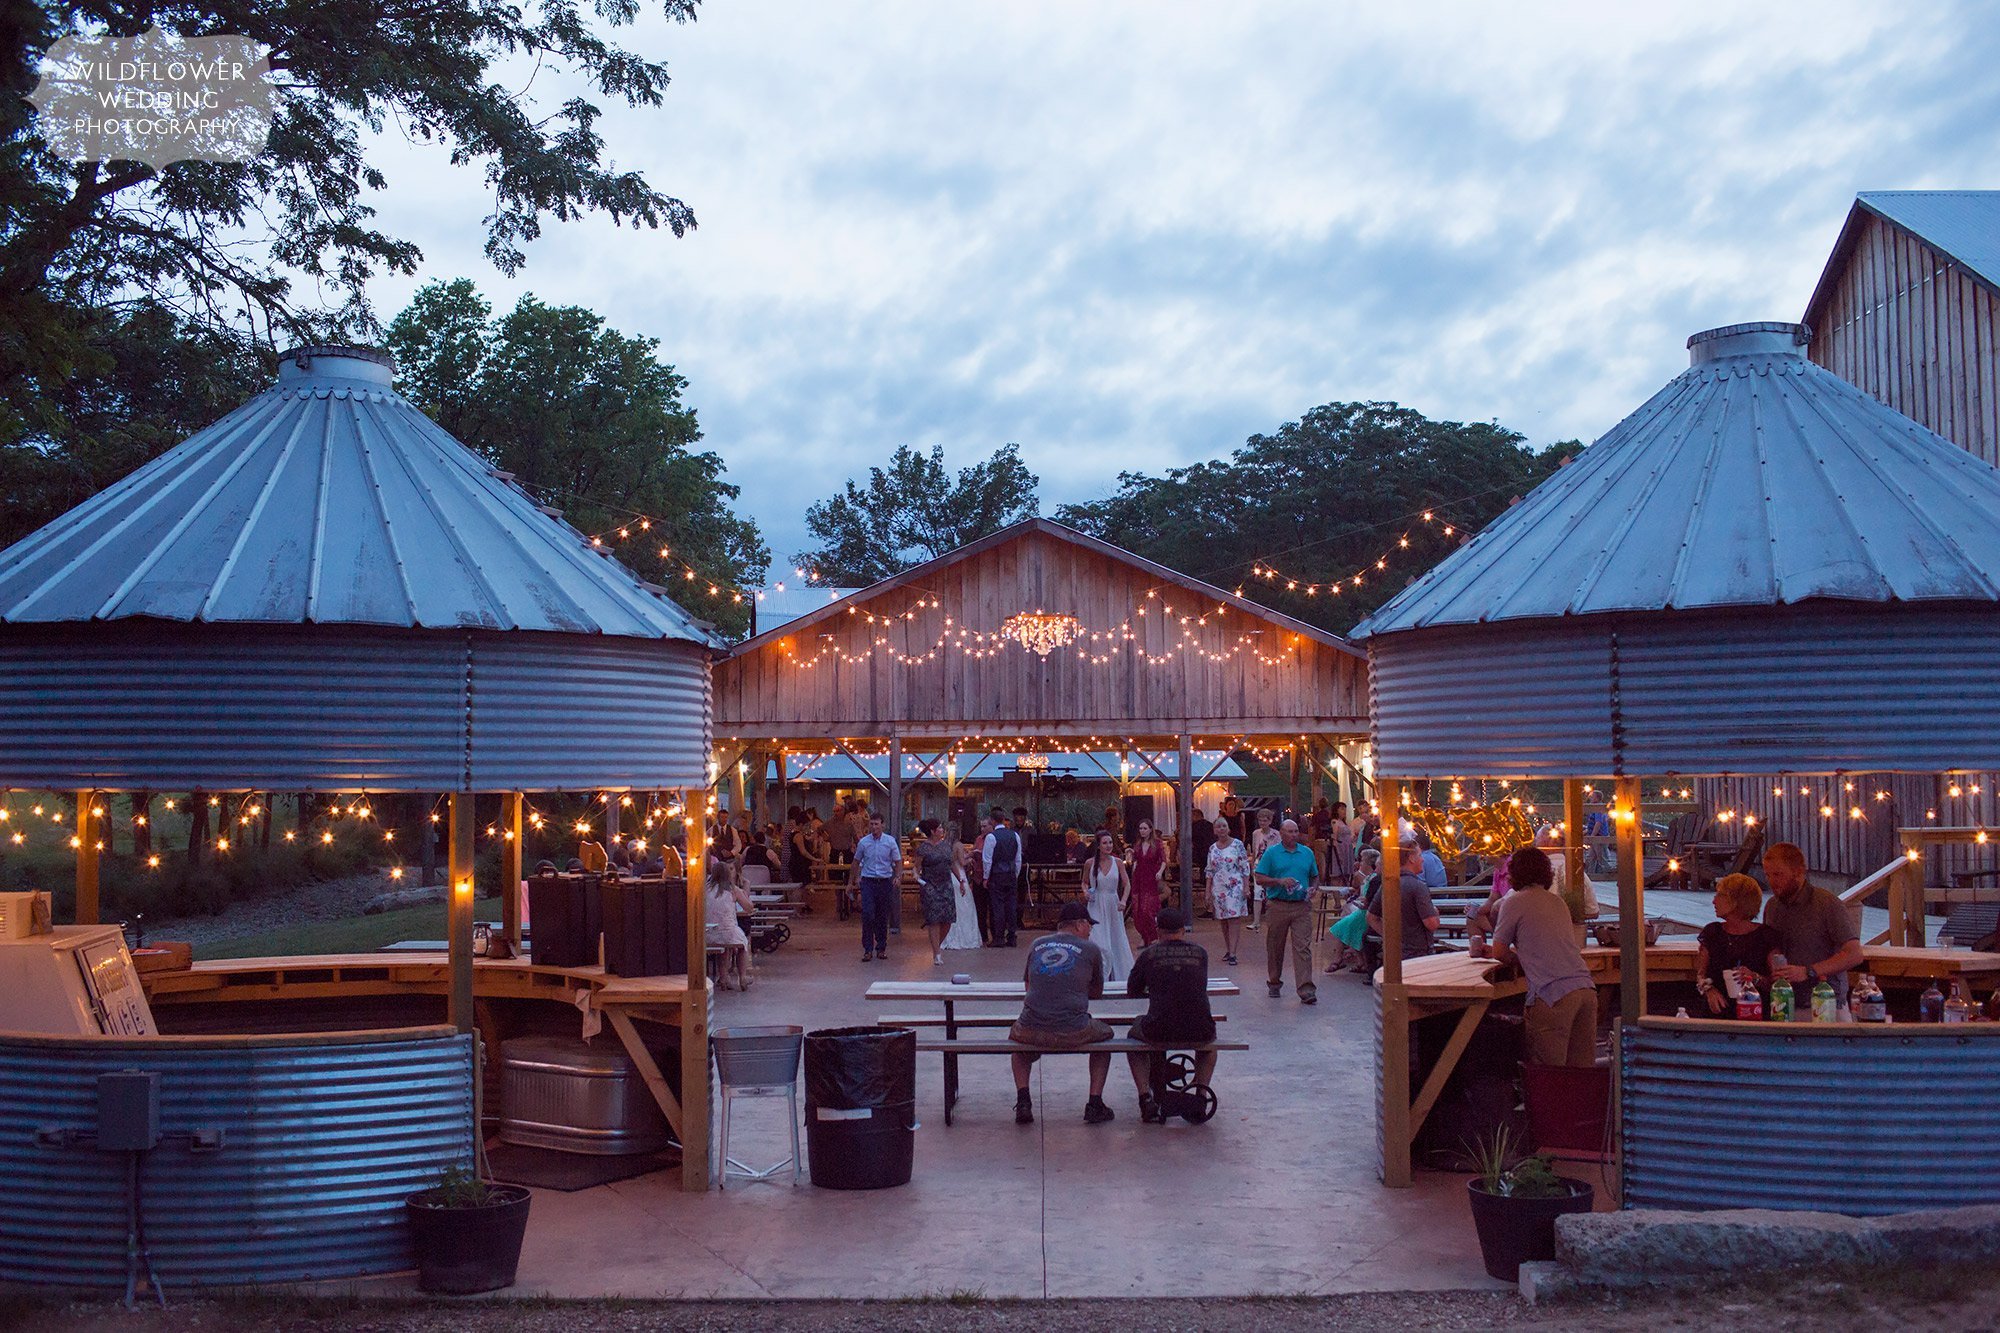 This Kempker's Back 40 Barn wedding in the country had the most beautiful outdoor dancing patio with string lights above and silos as outdoor bars for drinks.